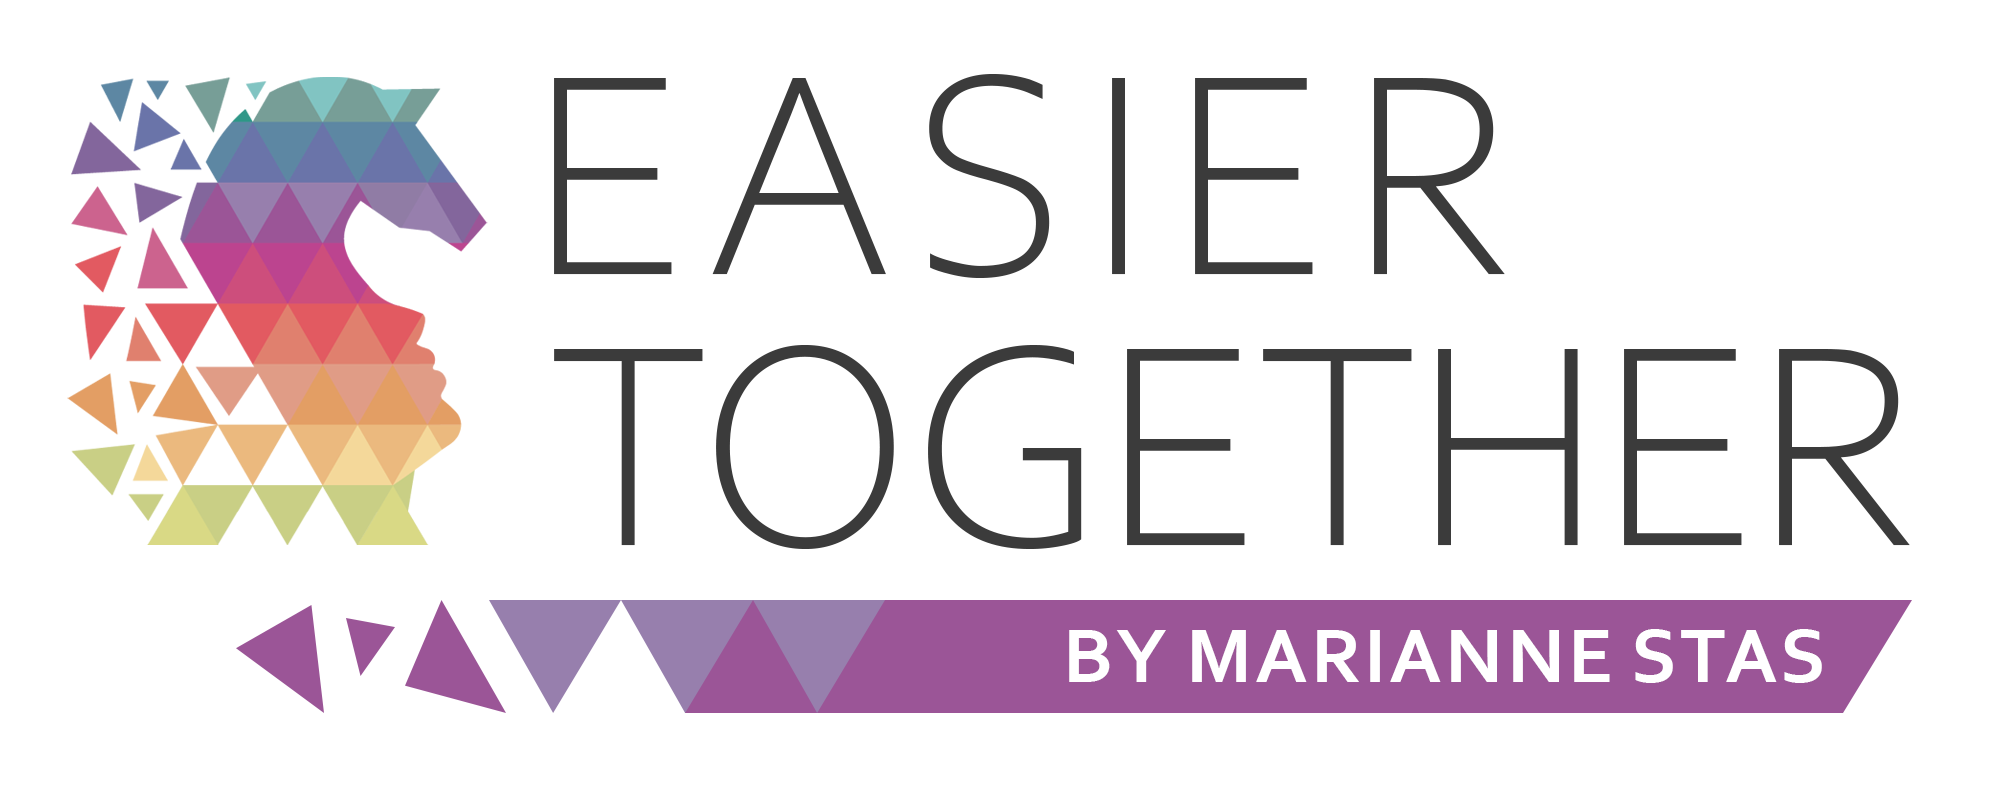 Easier Together - by Marianne Stas